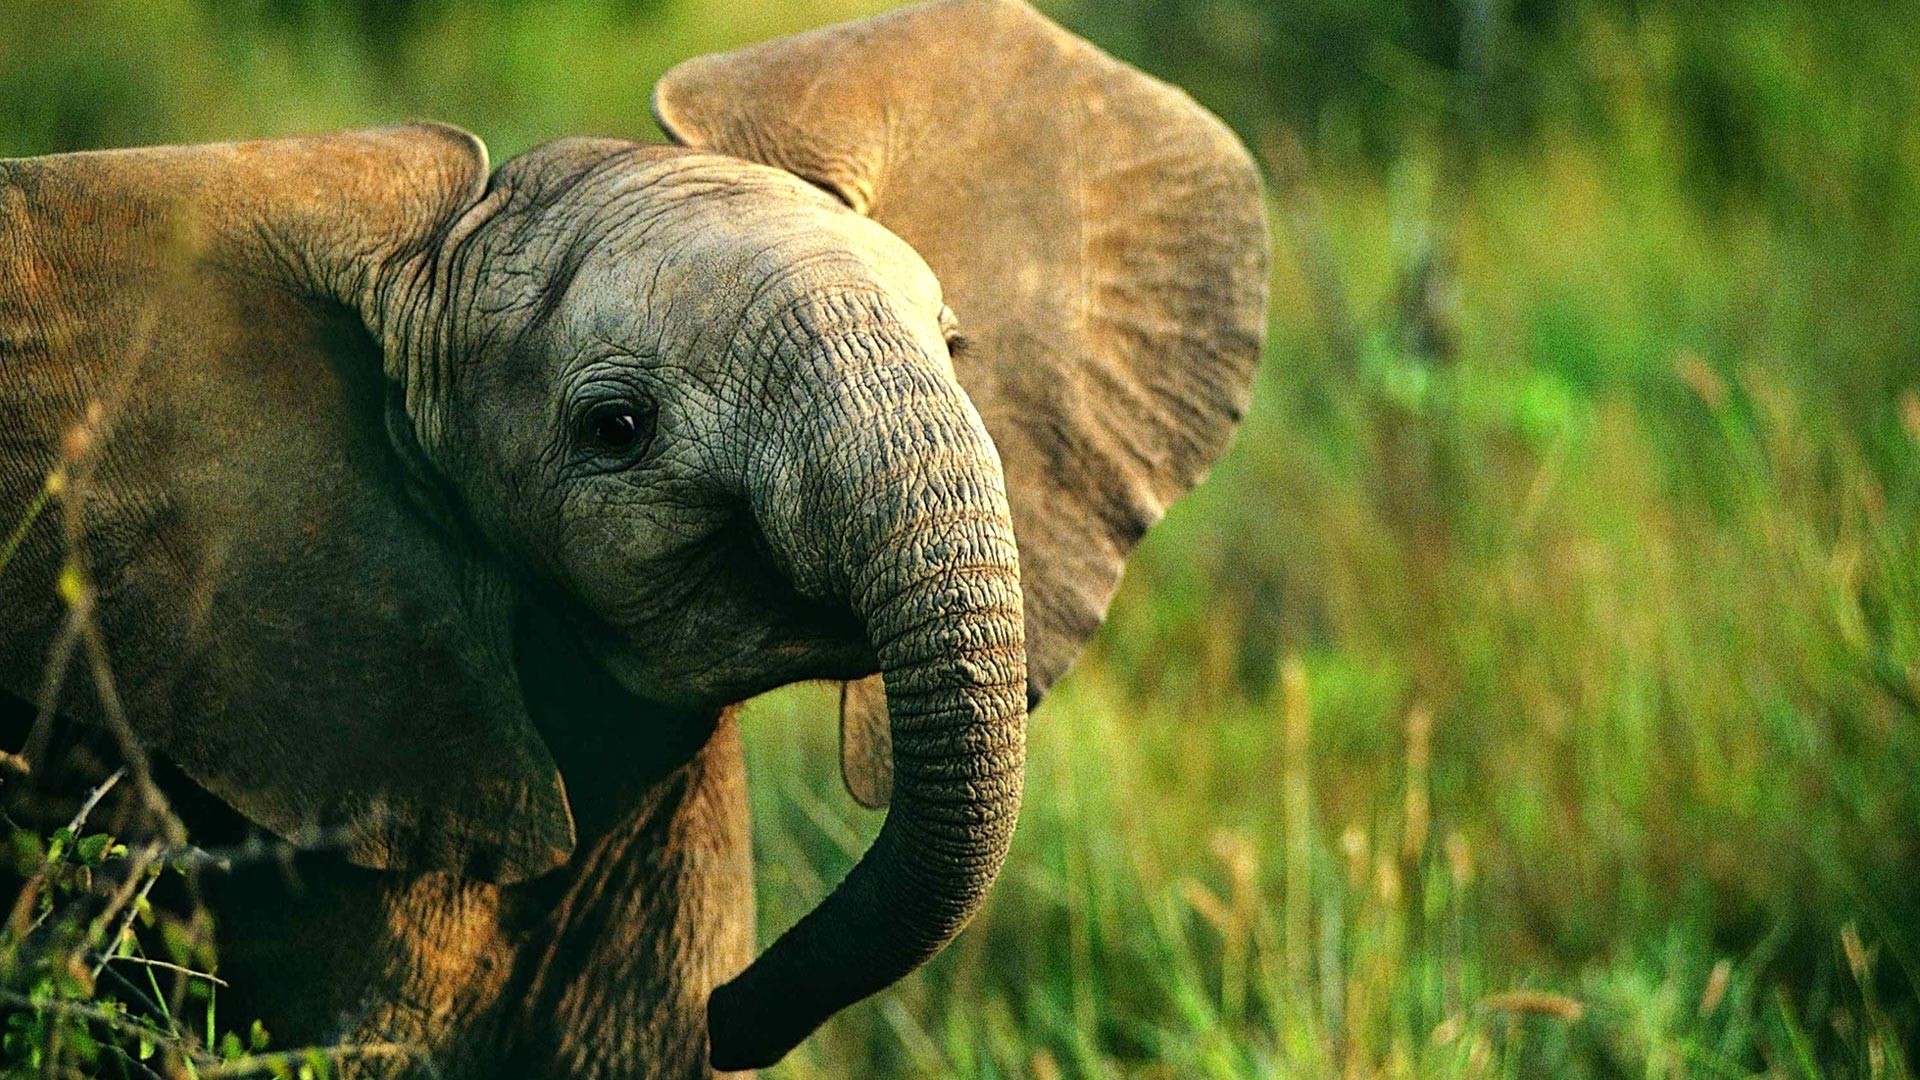 Baby Elephant Wallpaper (66+ images) - photo#31